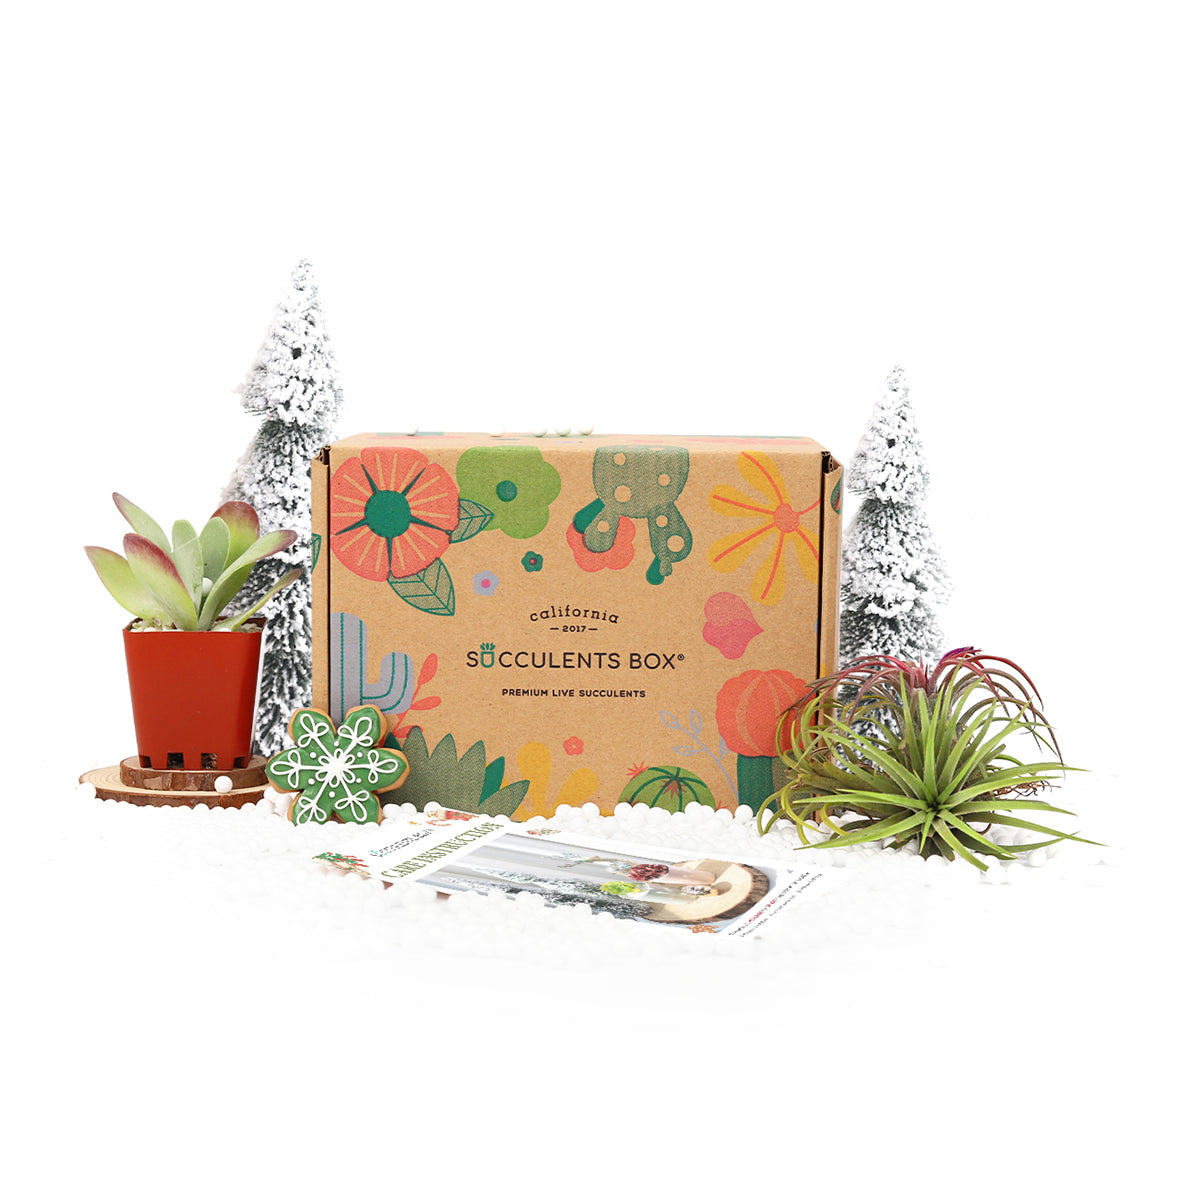 subscription box gift ideas, subscription gift box, Succulent subscription box delivered monthly